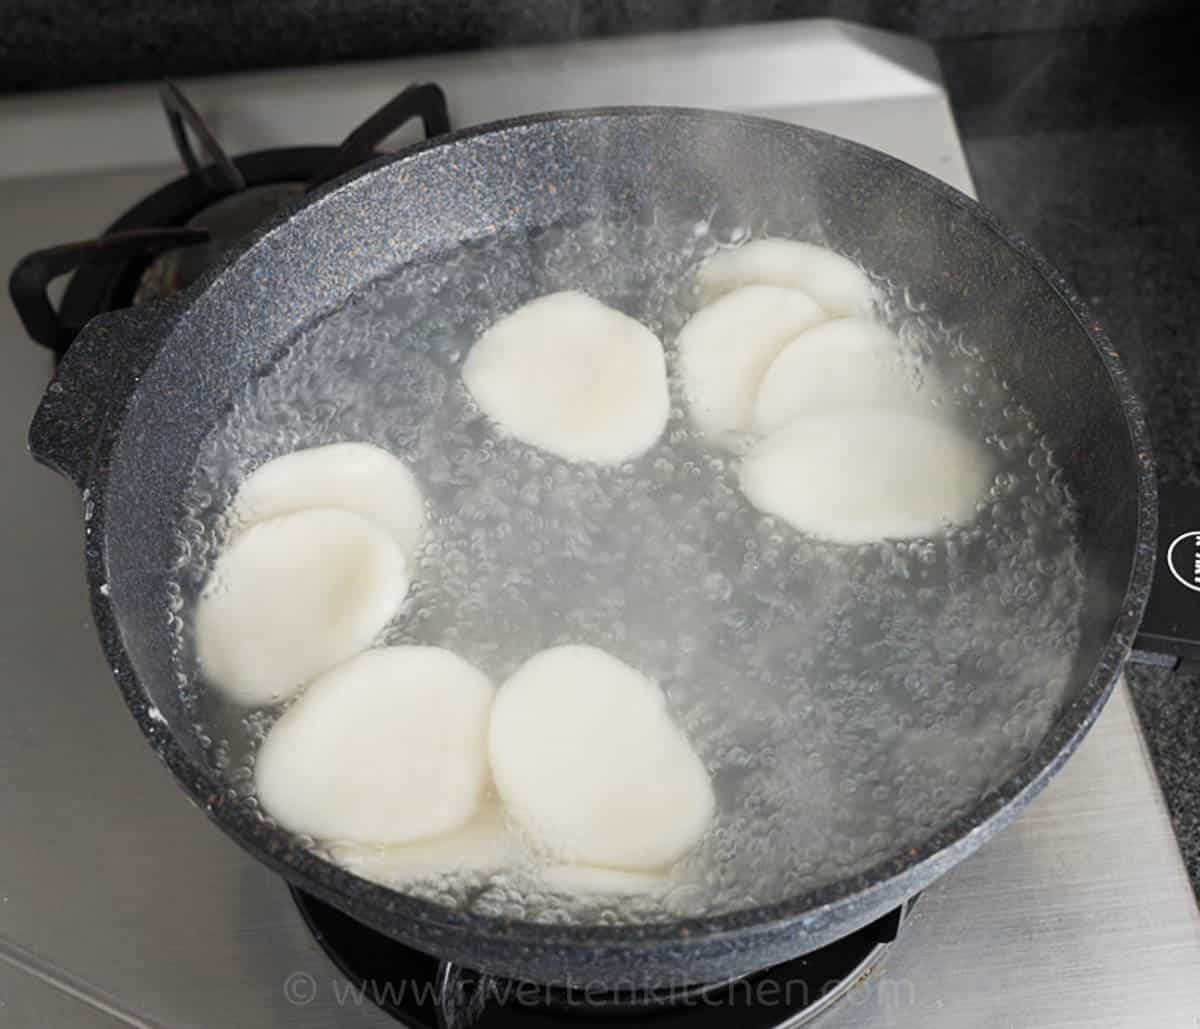 flat glutinous rice cake called palitaw cooking in boiling water.